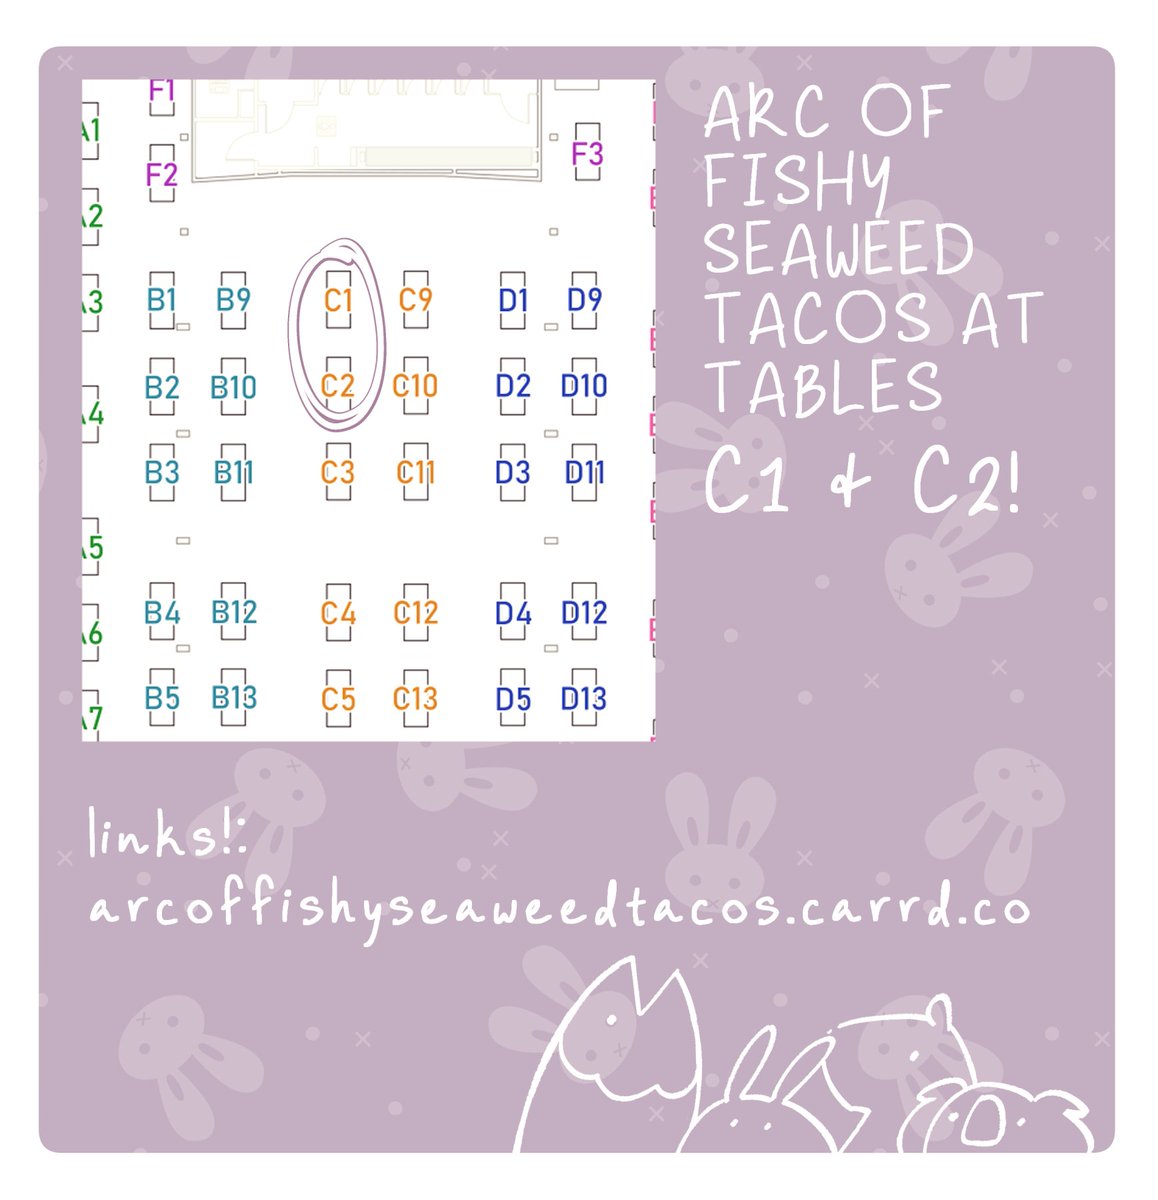 We'll be at tables C1 & C2!! 